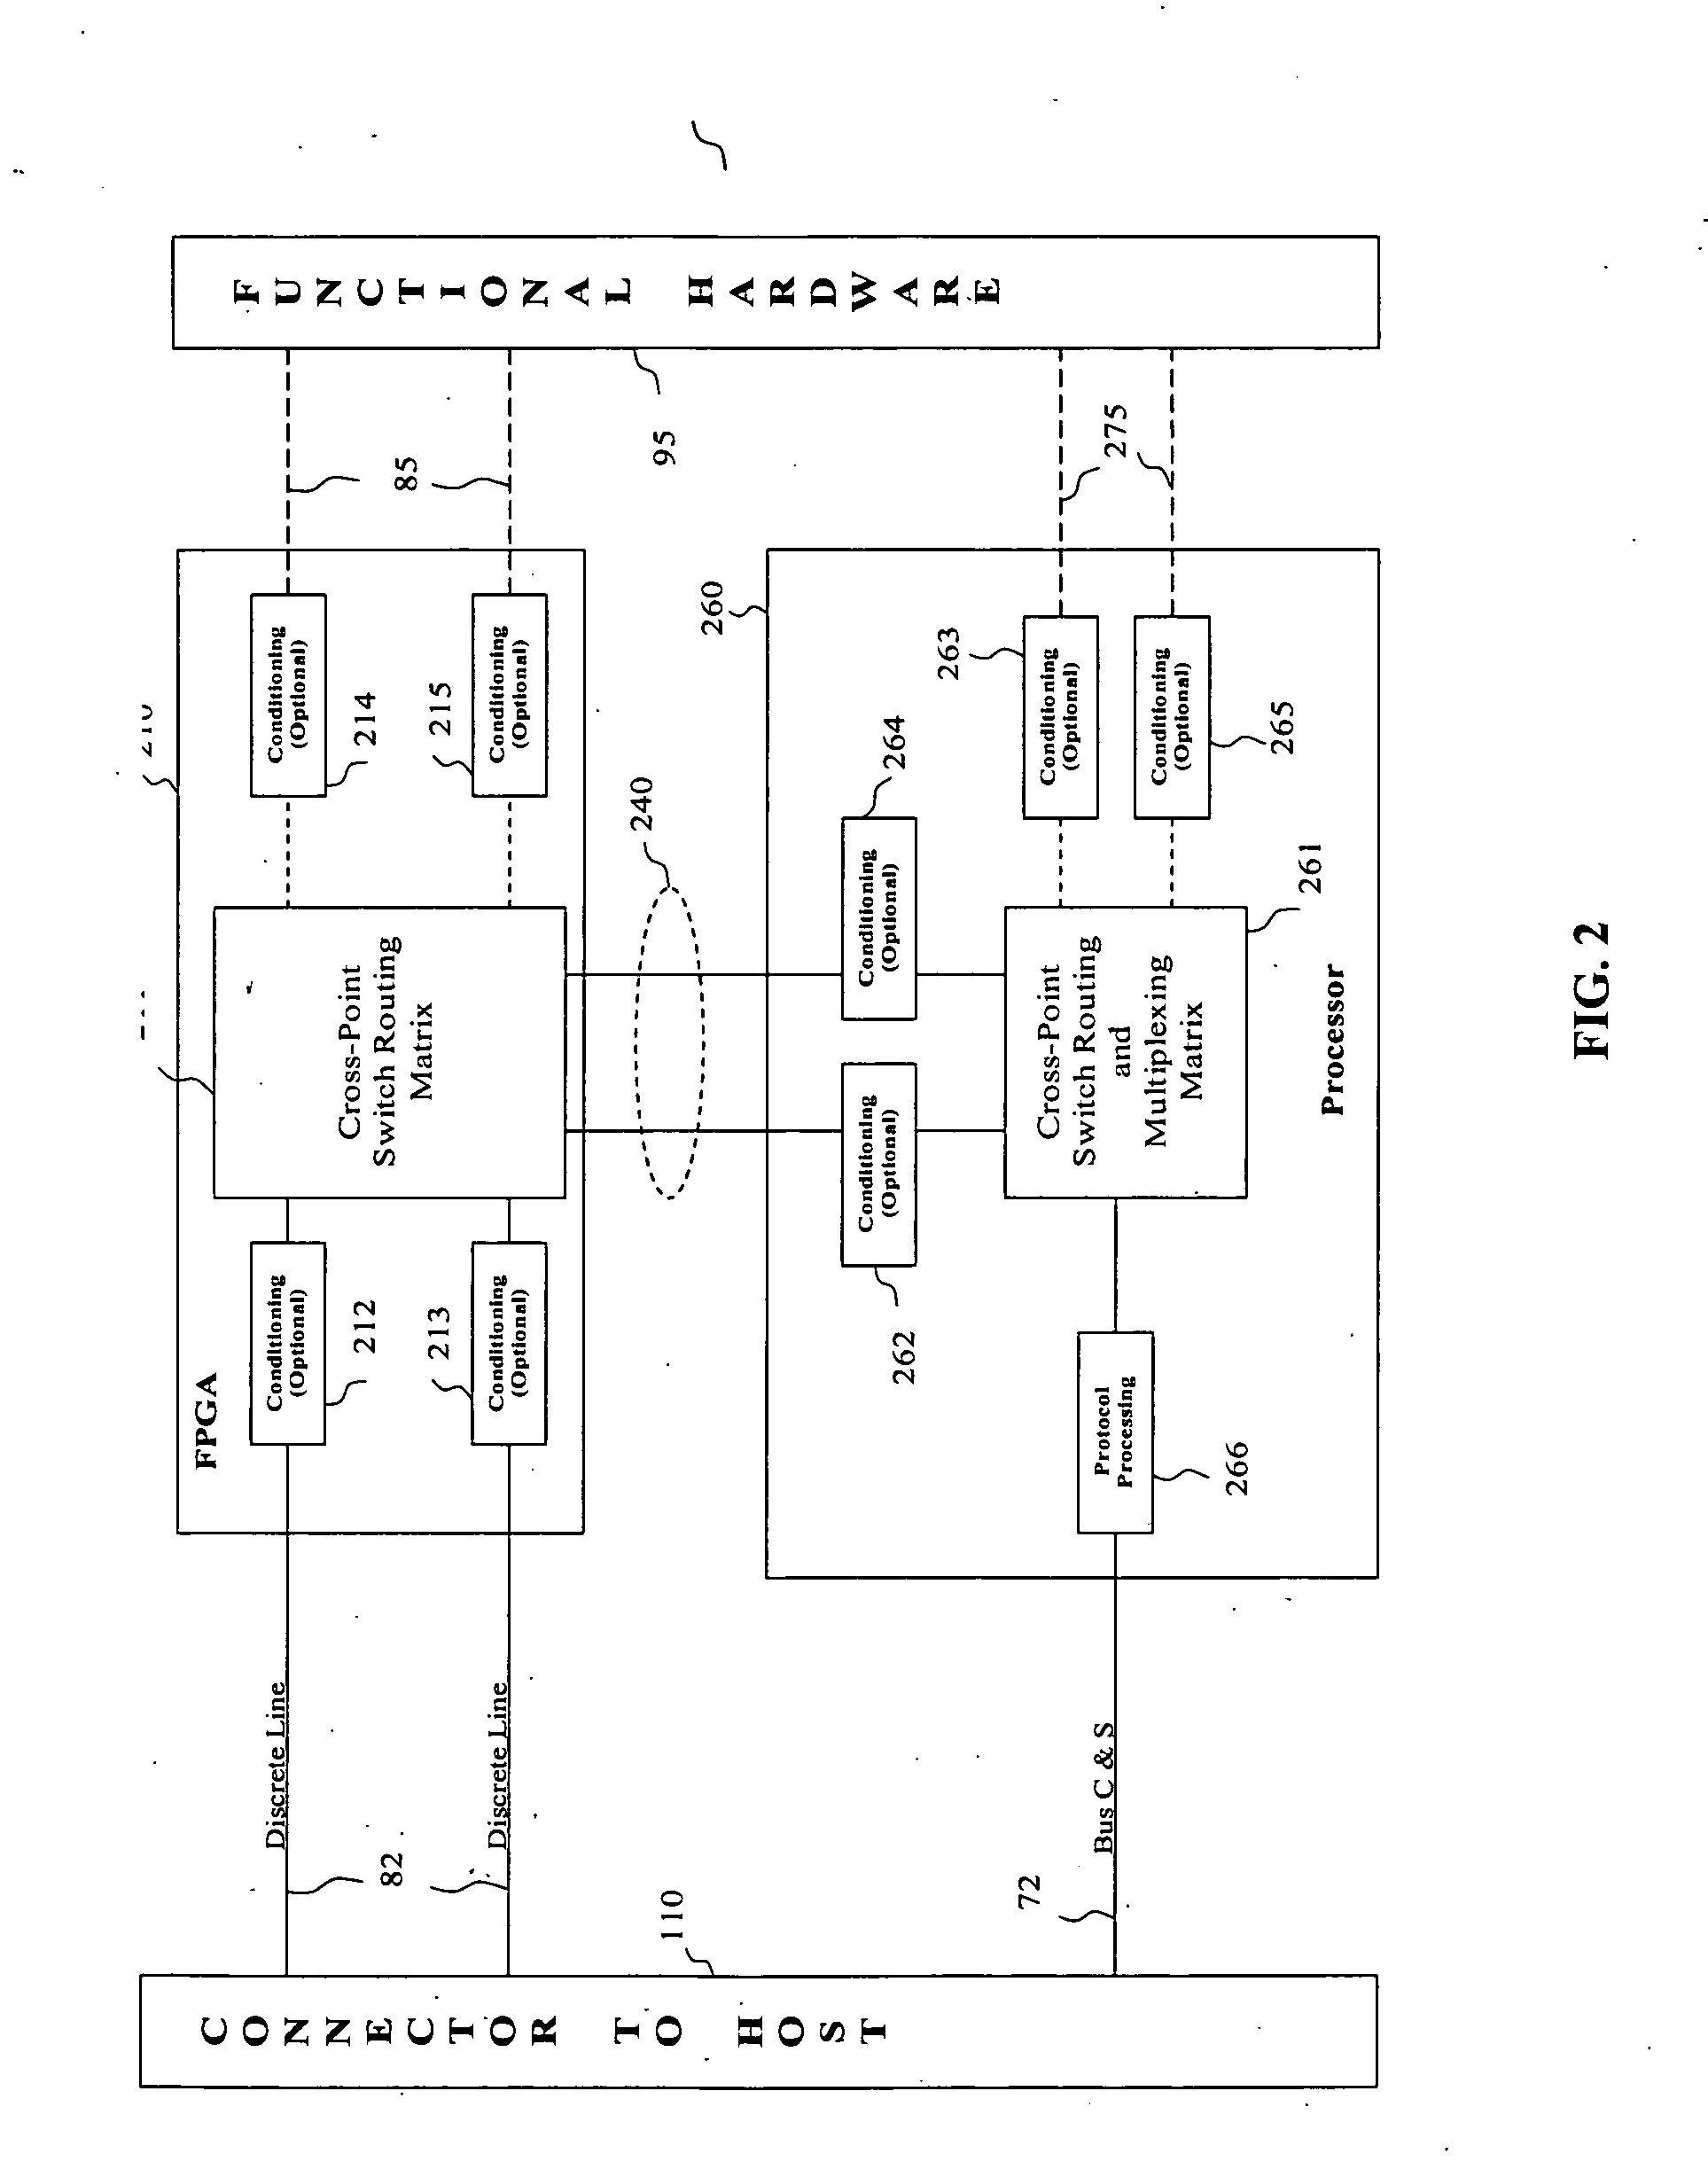 Flexible control and status architecture for optical modules